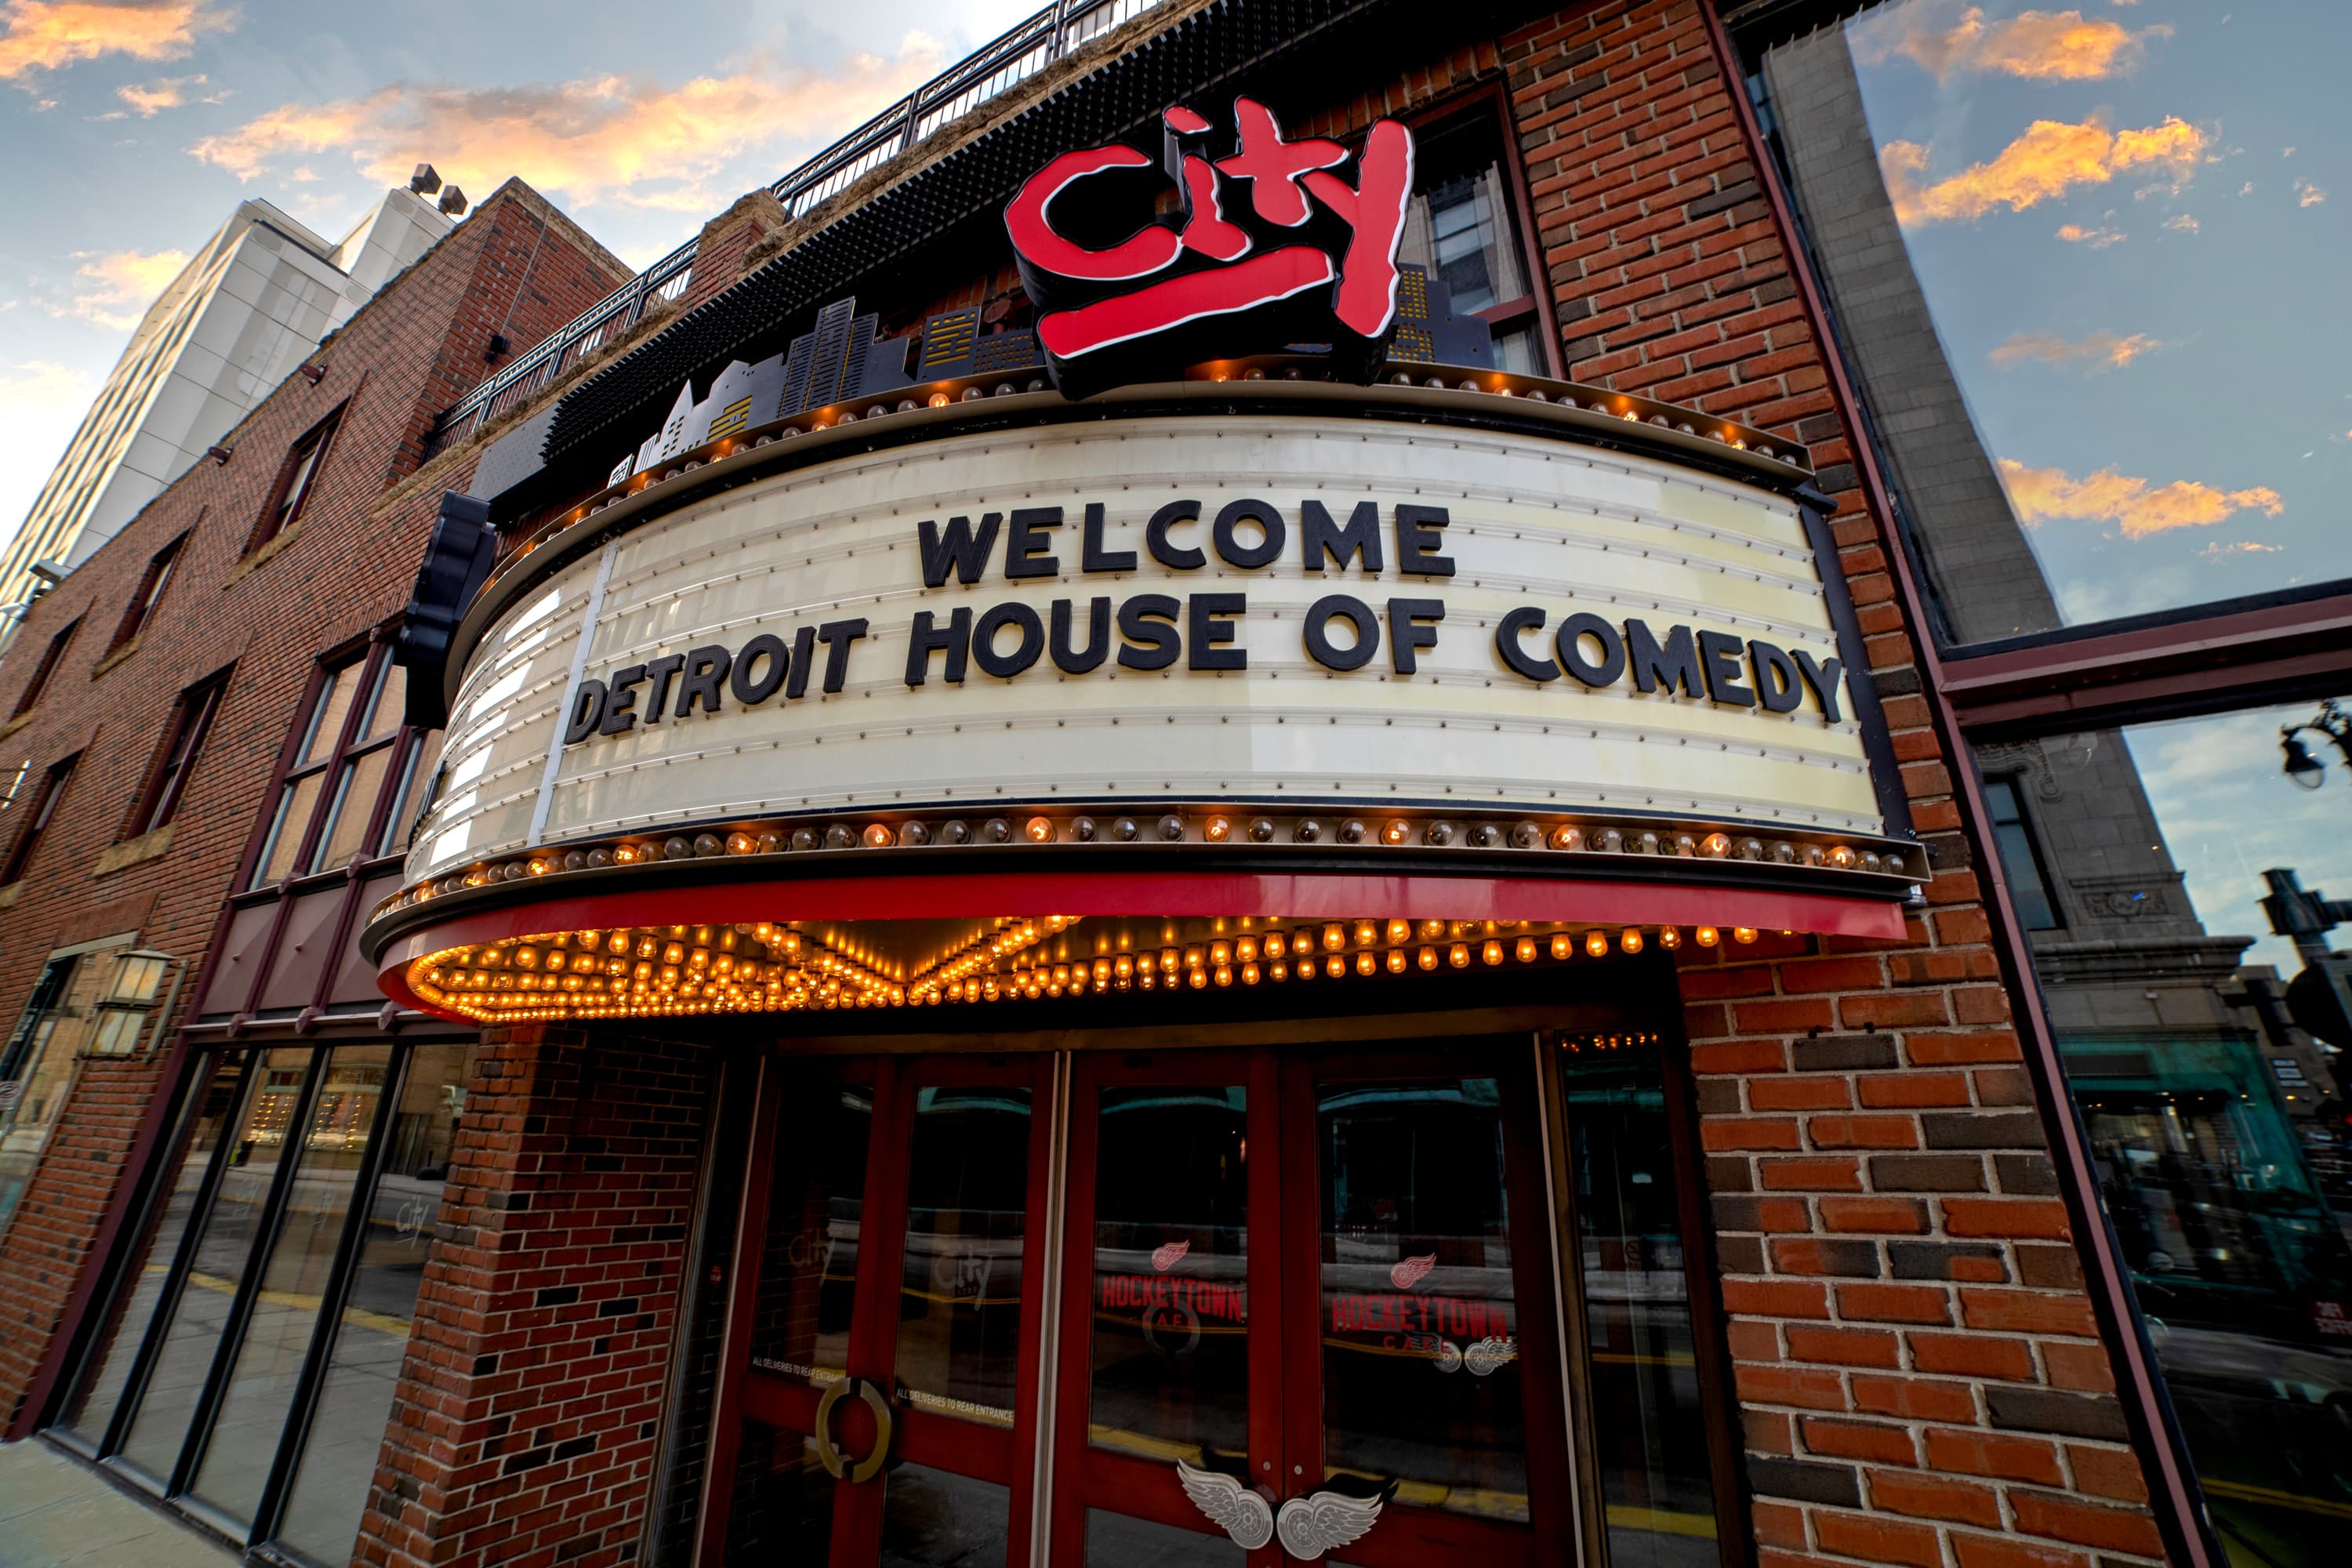 Welcome Detroit House of Comedy